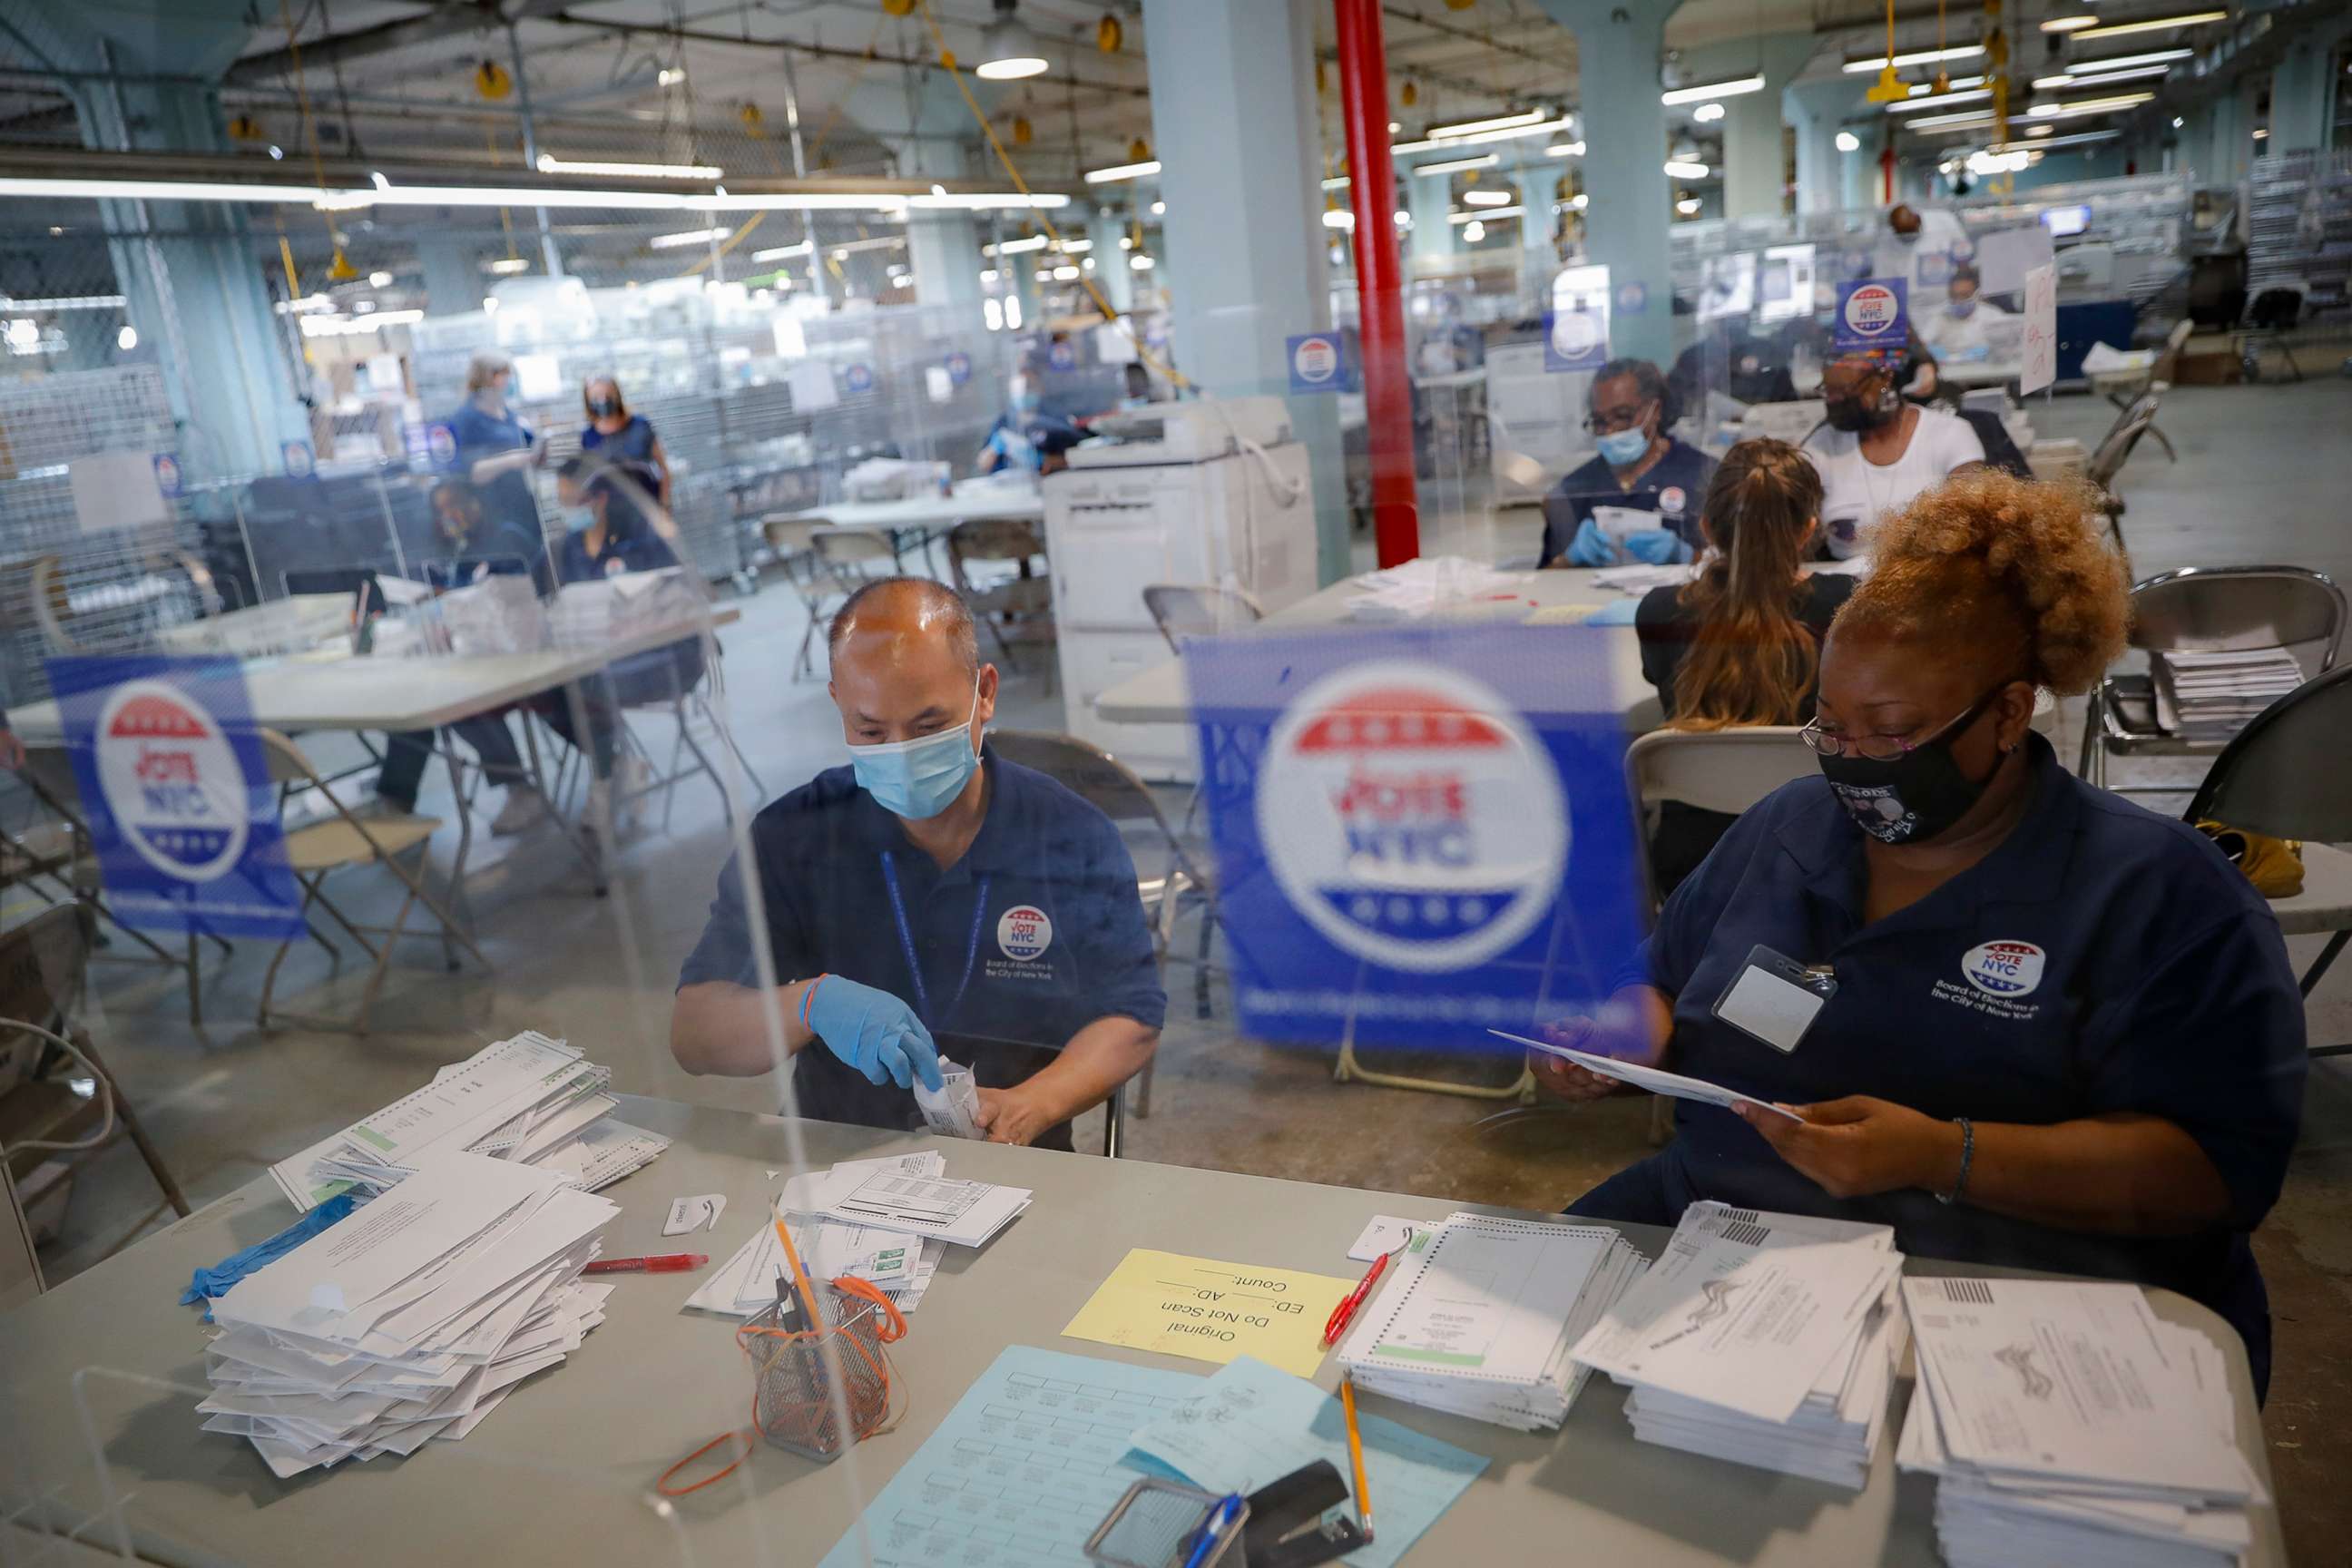 PHOTO: Workers wear personal protective equipment and are separated in pairs from fellow employees by plastic shields as they process ballots at a Board of Elections facility, July 22, 2020, in New York. 